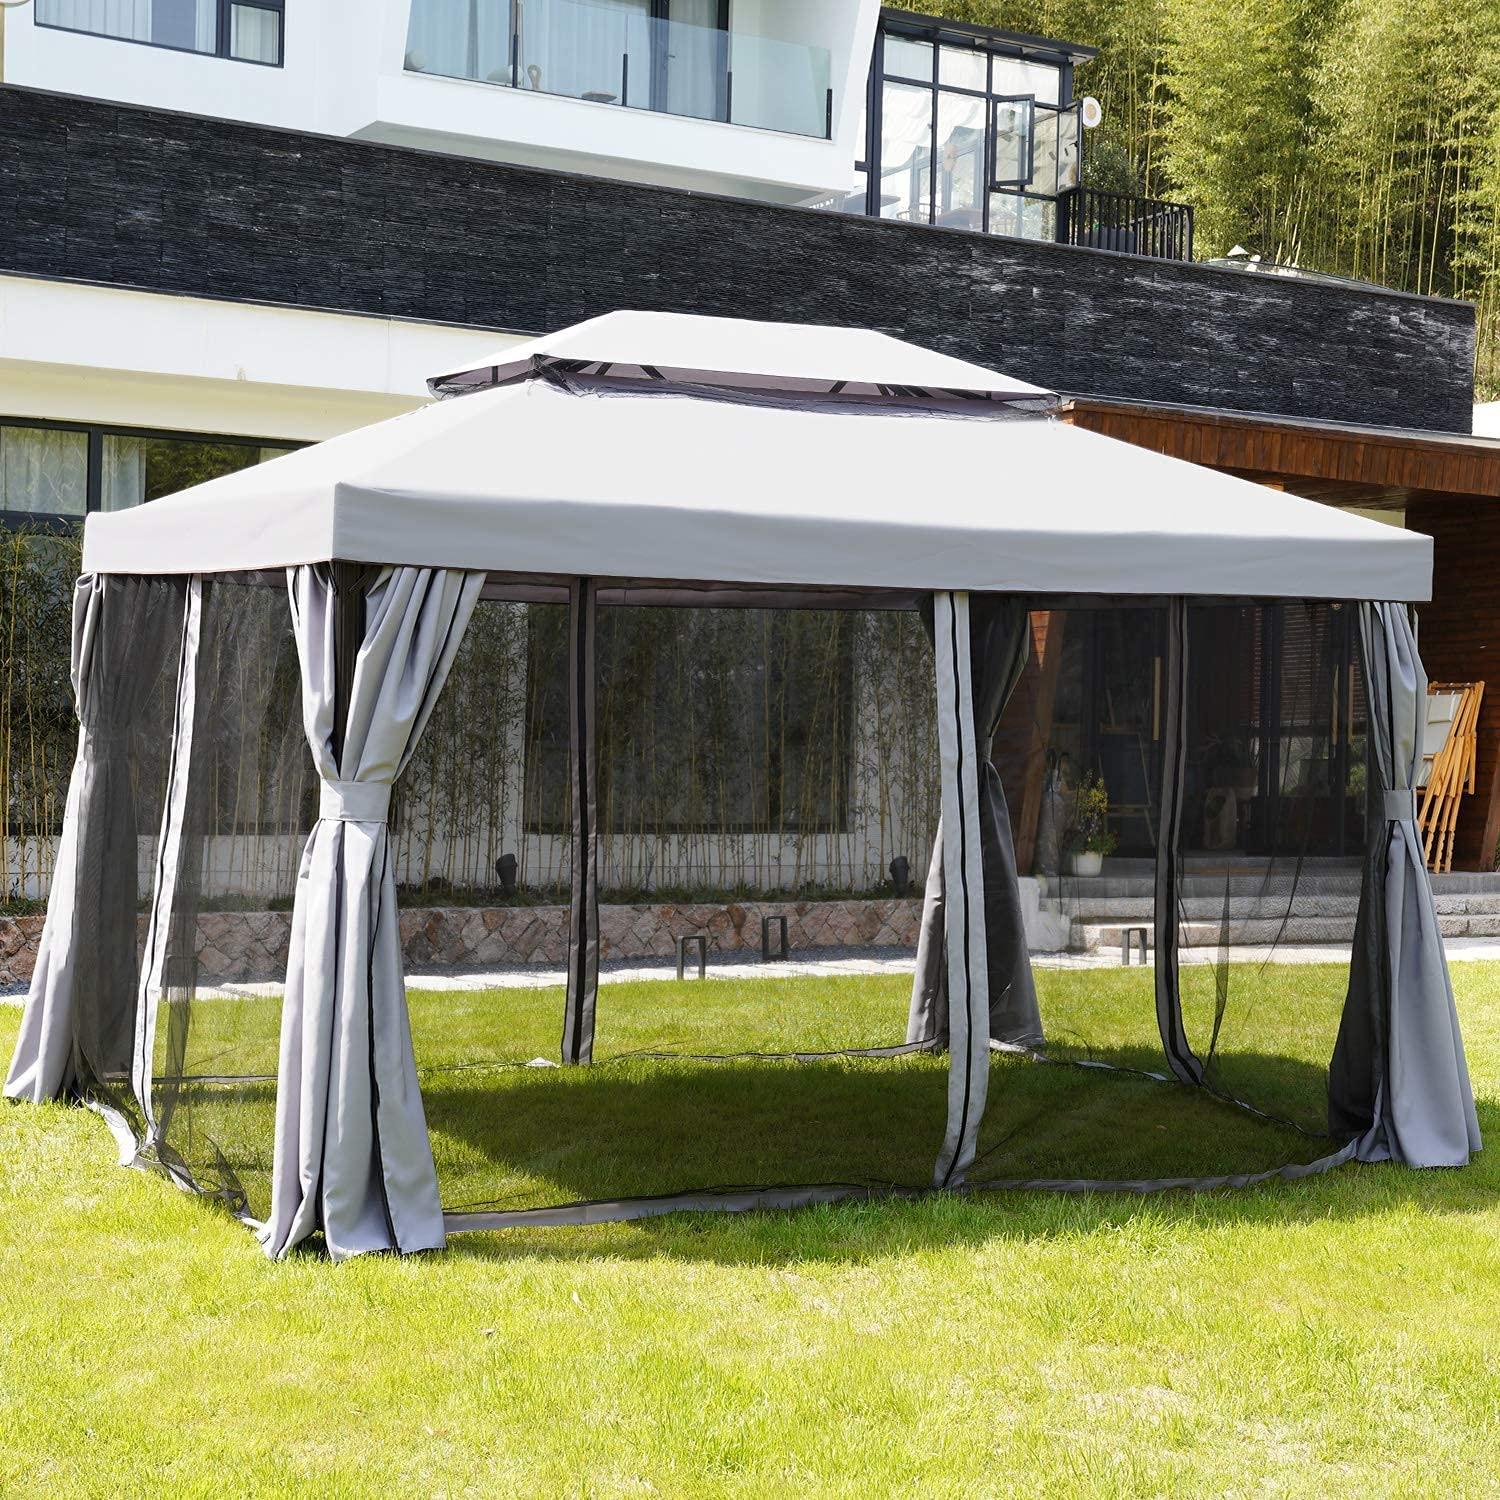 Mydepot SR Gazebo for Patios Outdoor Gazebo with Mosquito Netting and Curtains Outdoor Privacy Screen for Deck Backyard